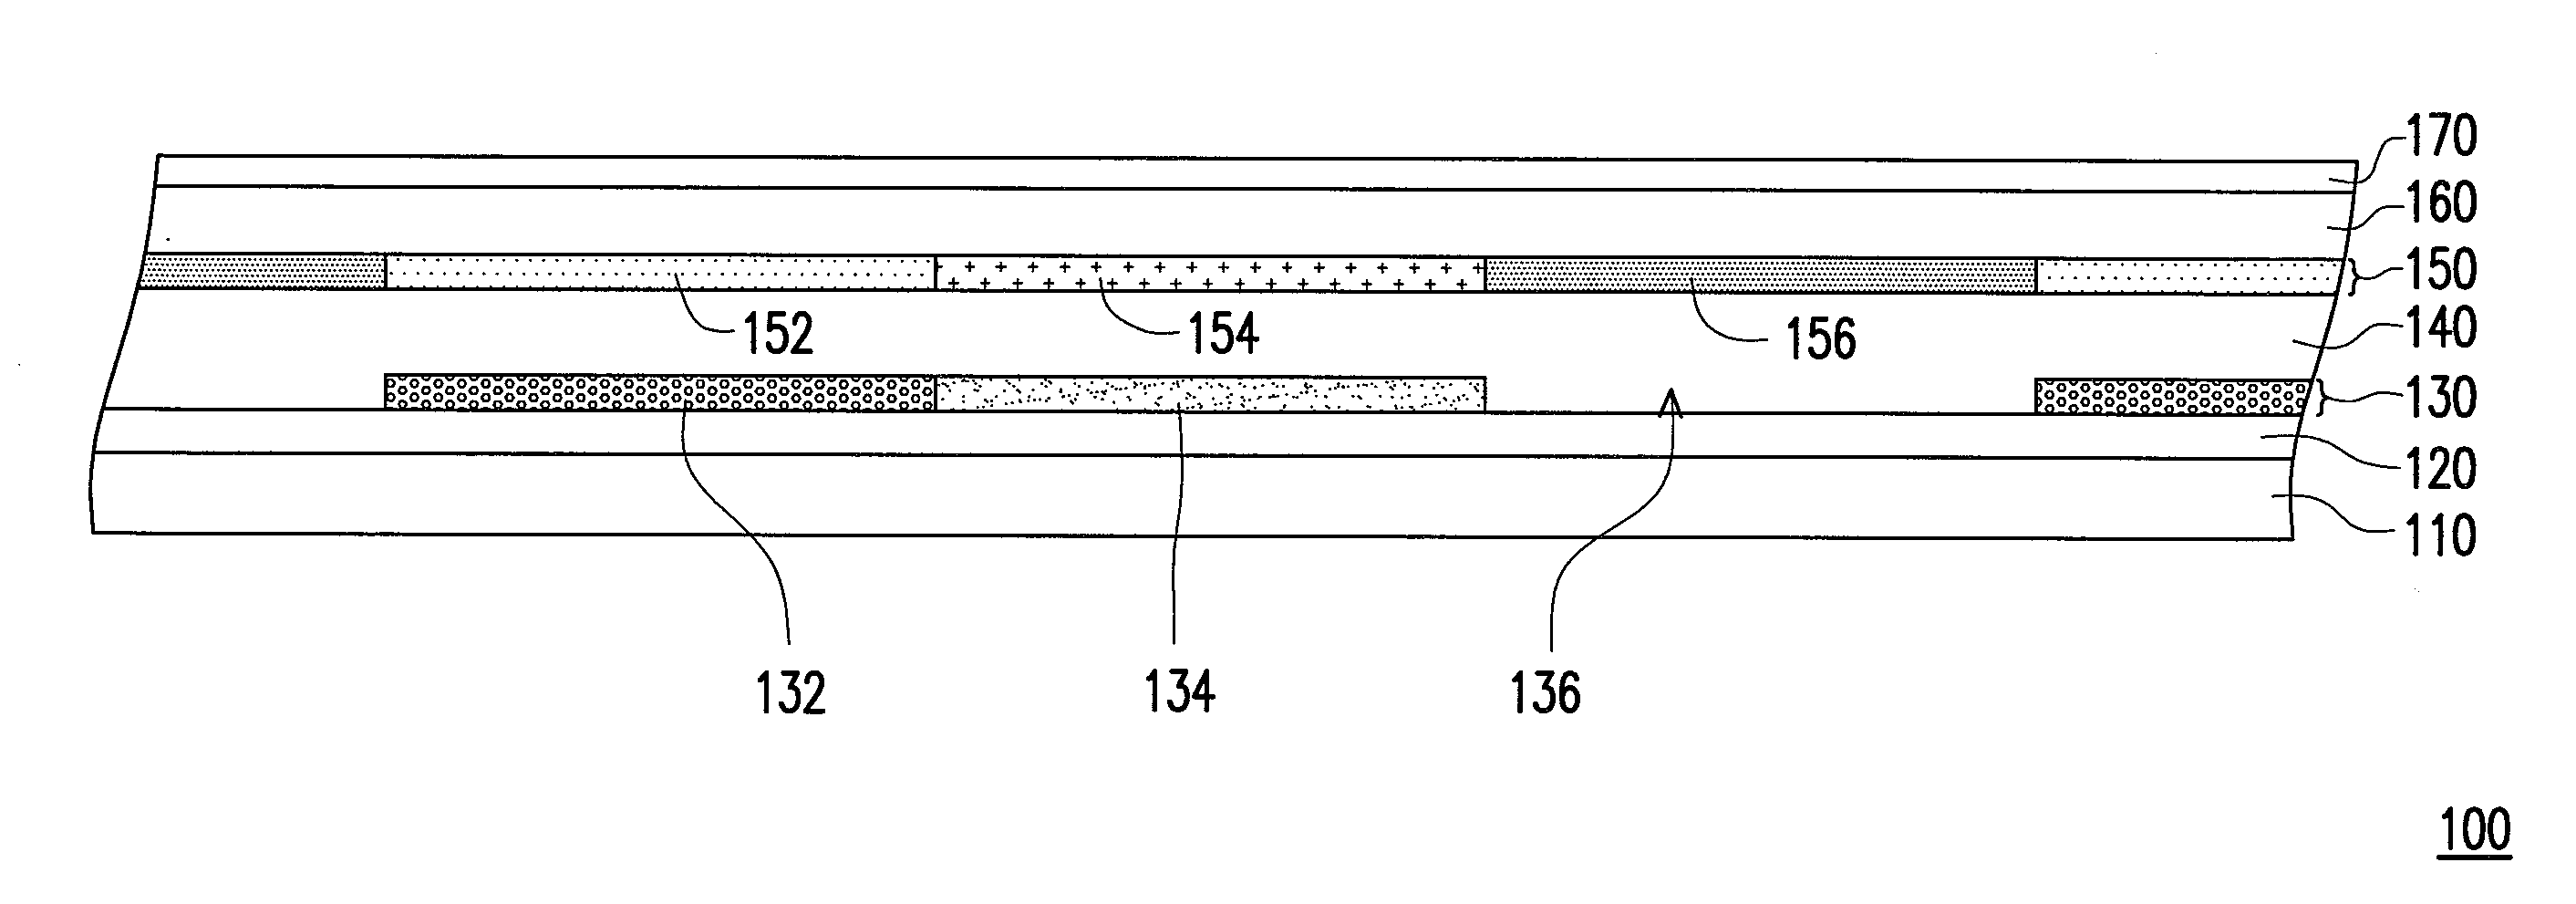 Color filter array on pixel array substrate and display panel